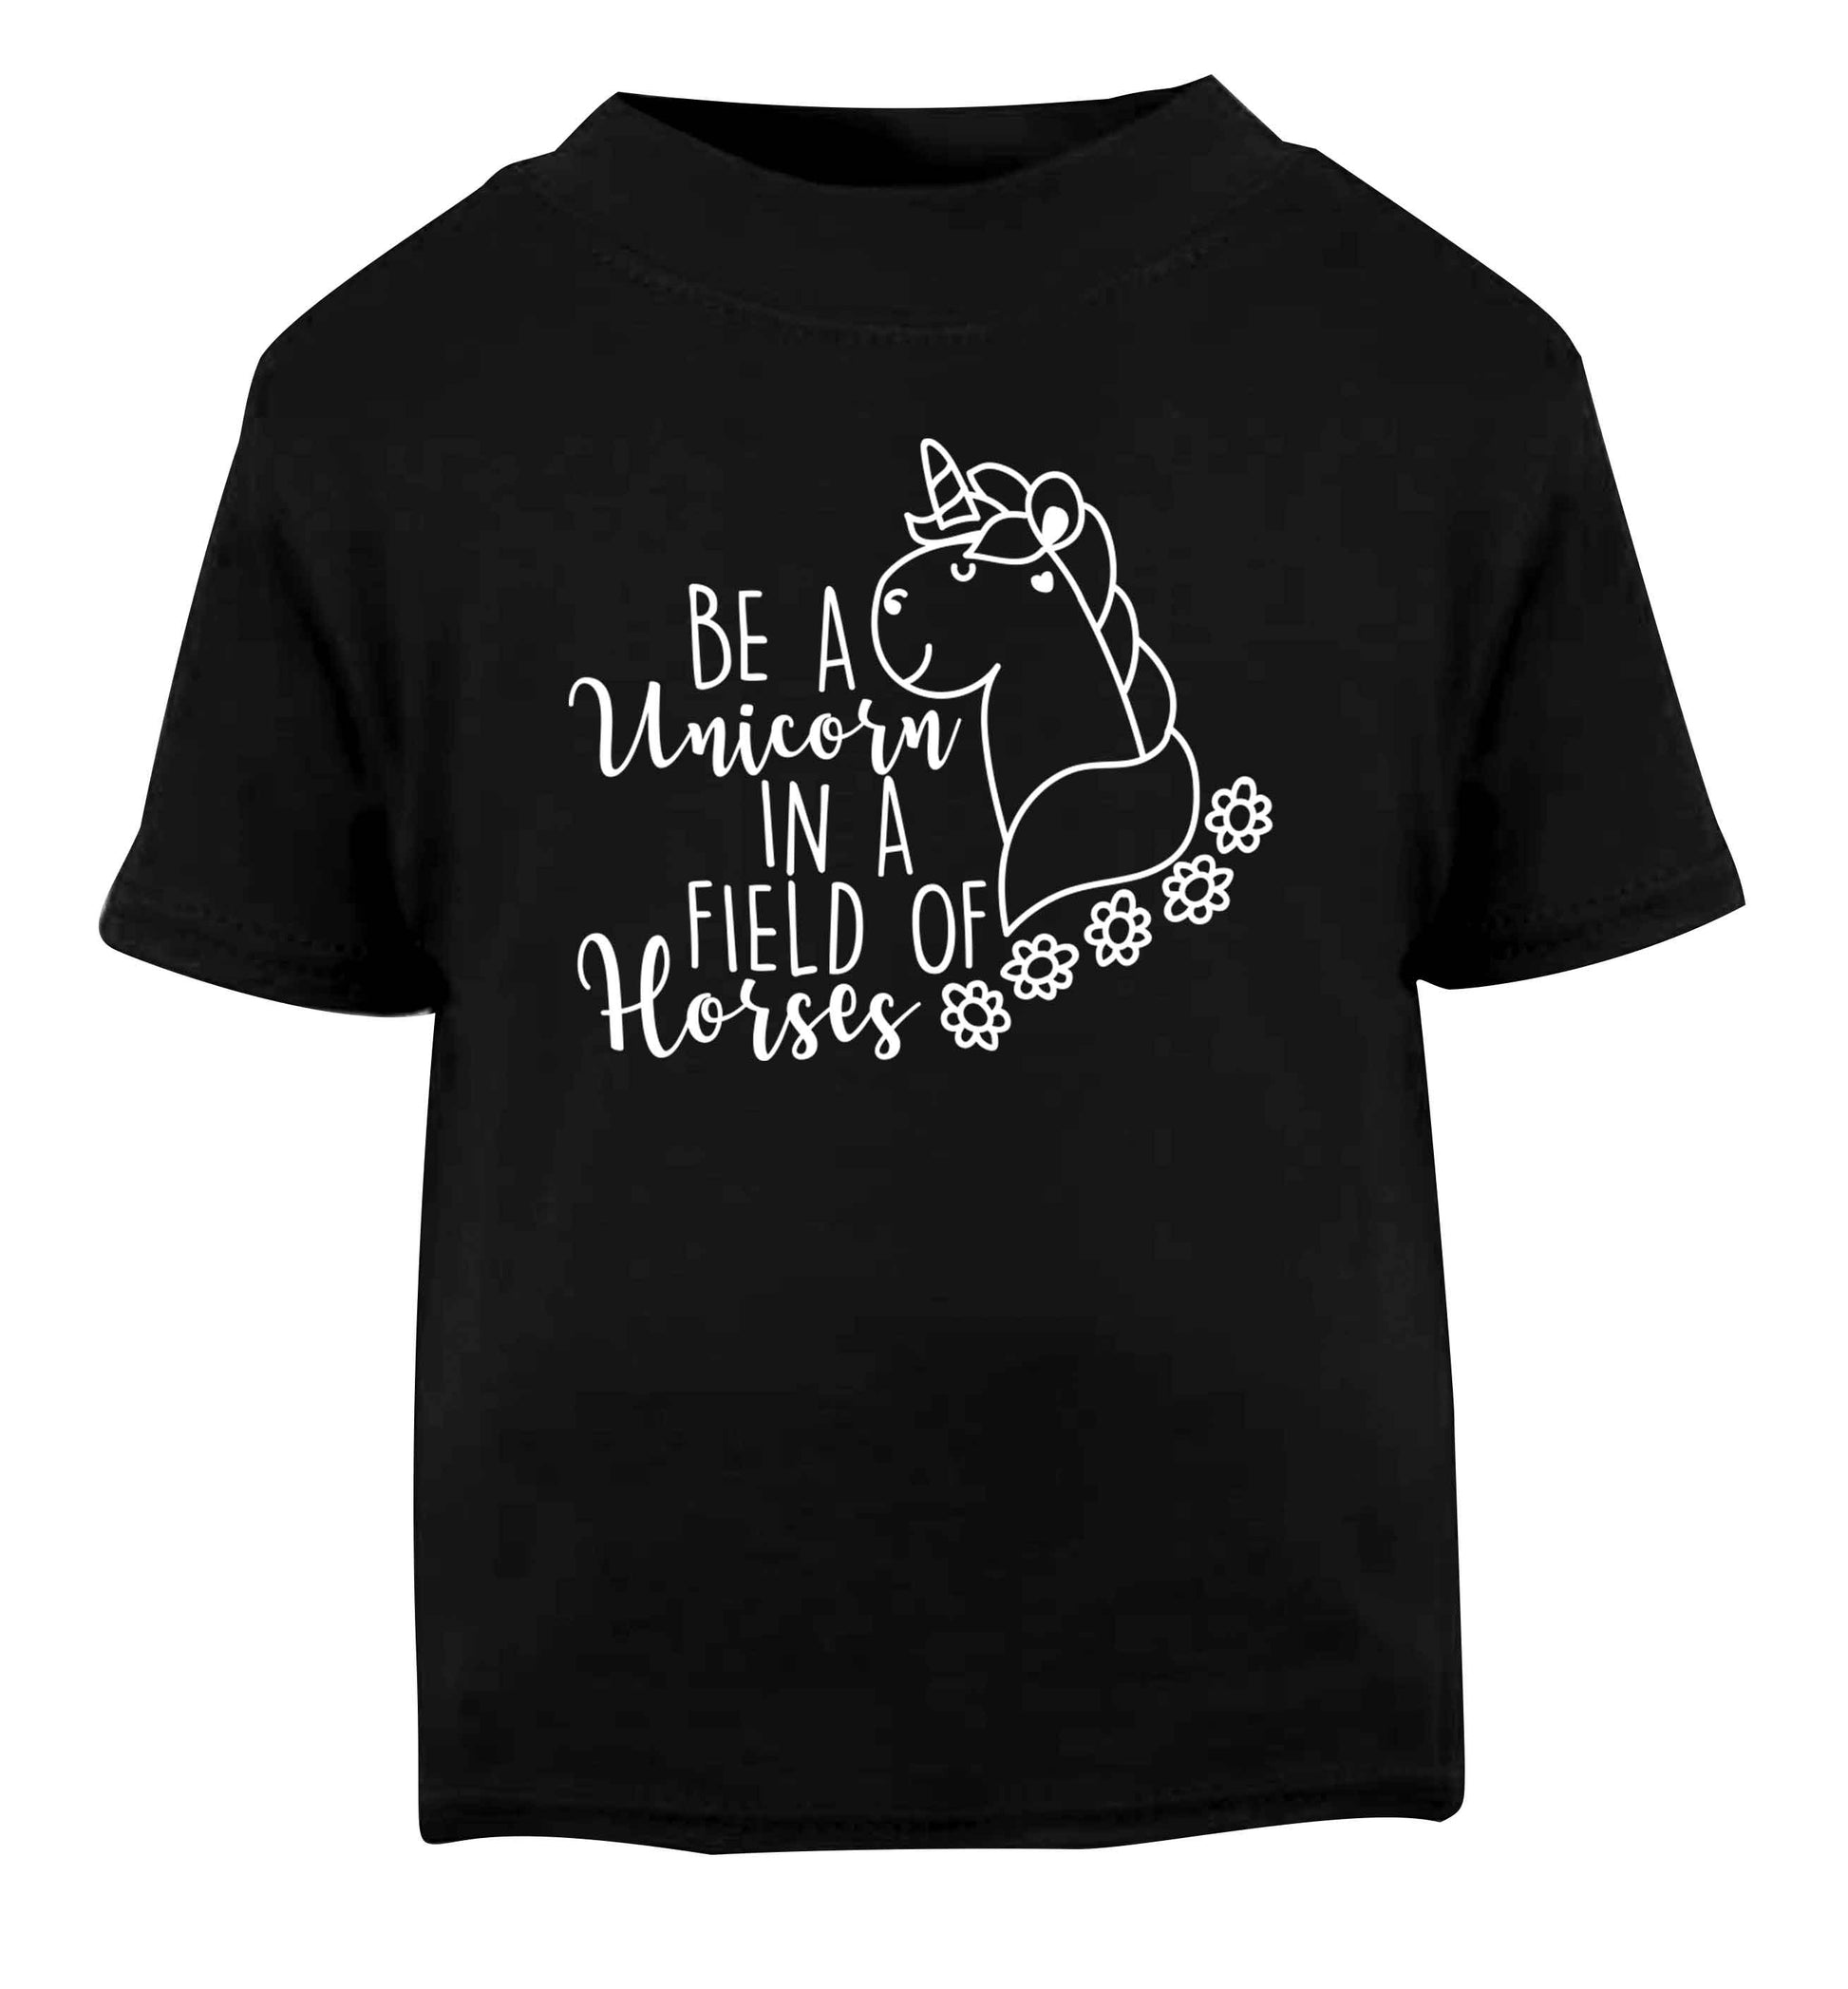 Be a unicorn in a field of horses Black Baby Toddler Tshirt 2 years